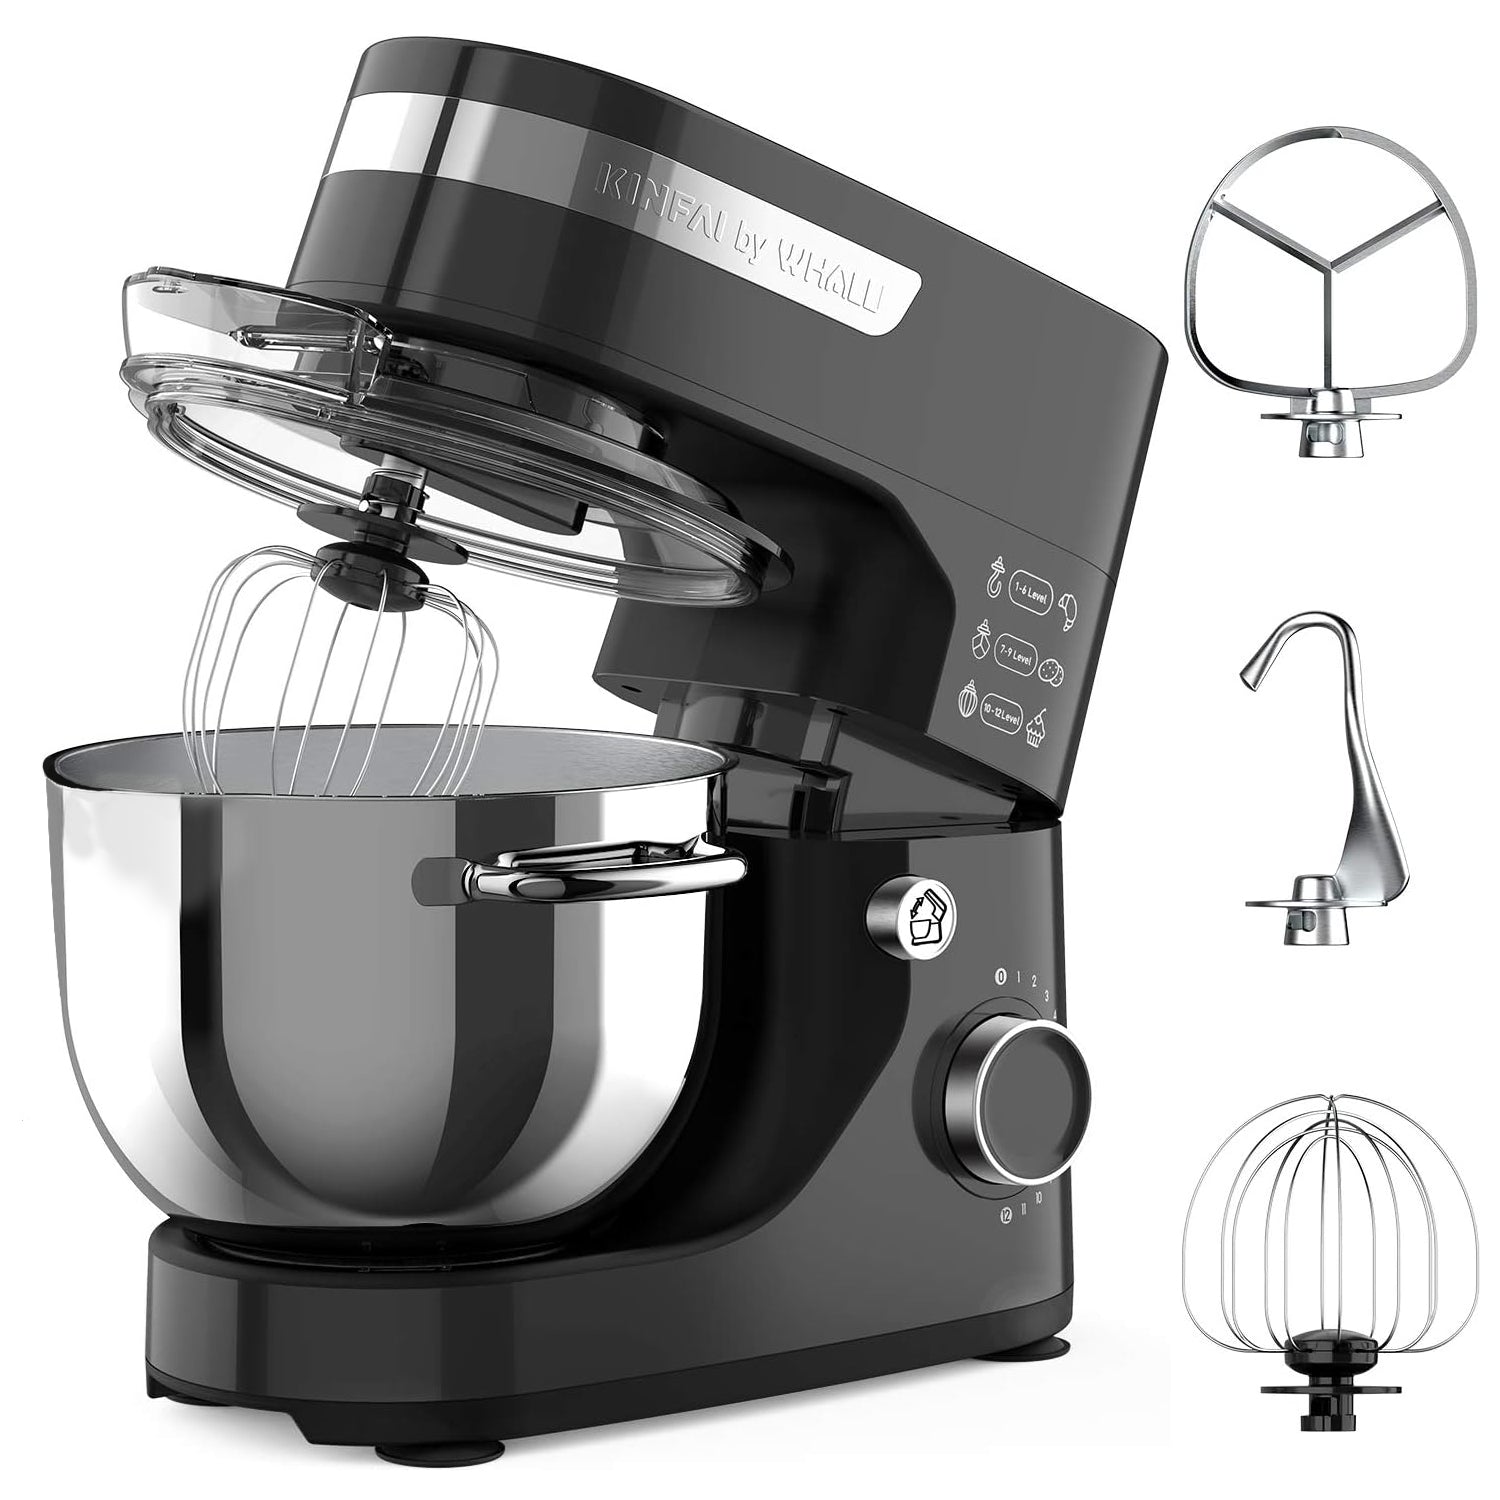 WHALL Stand Mixer - 5.5Qt 12-Speed Tilt-Head Electric Kitchen Mixer with Dough Hook/Wire Whip/Beater, Stainless Steel Bowl (black)